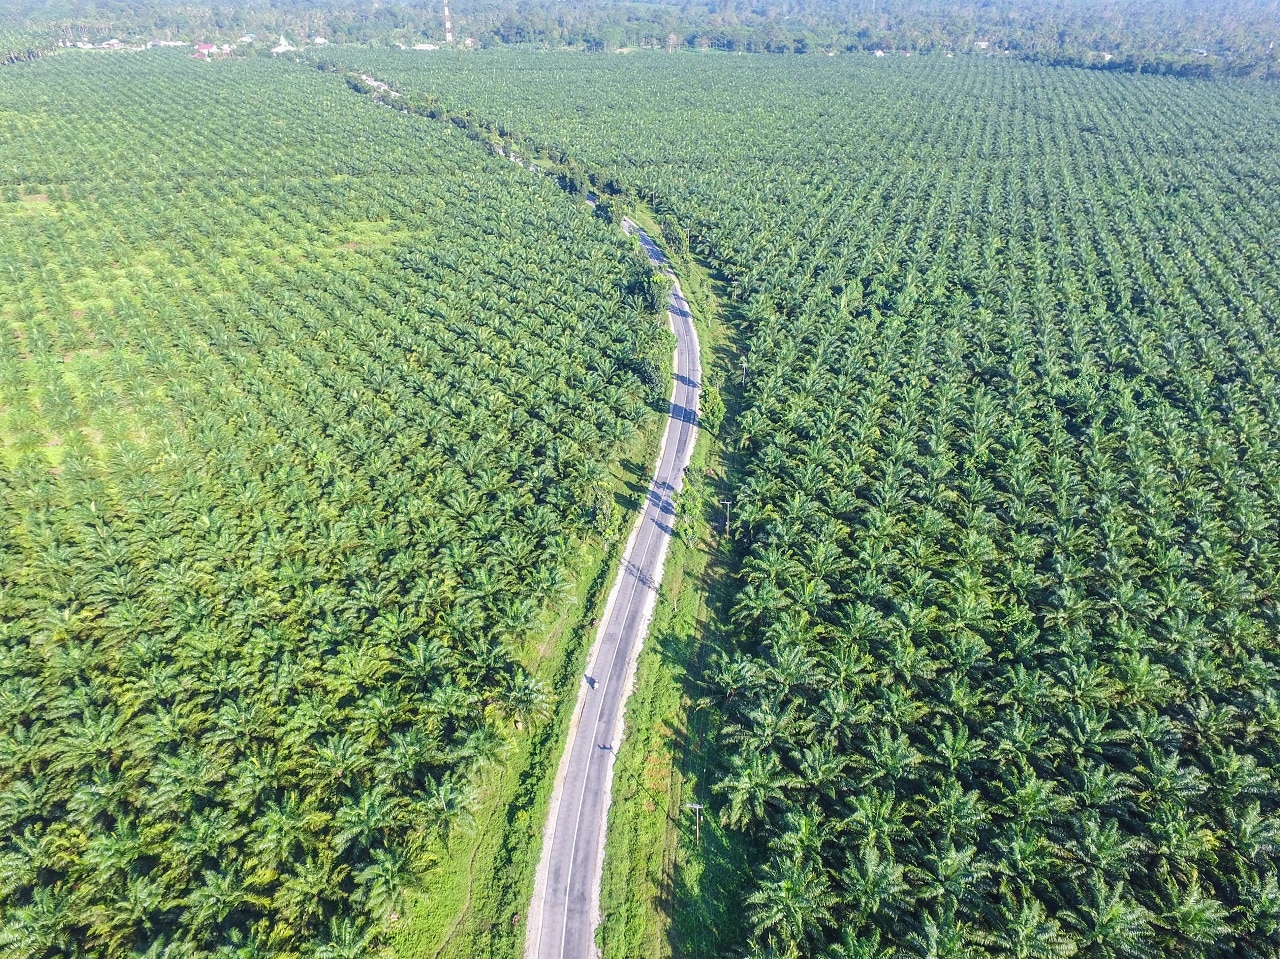 'Human rights tragedy': Palm oil plantations taking toll on Indigenous